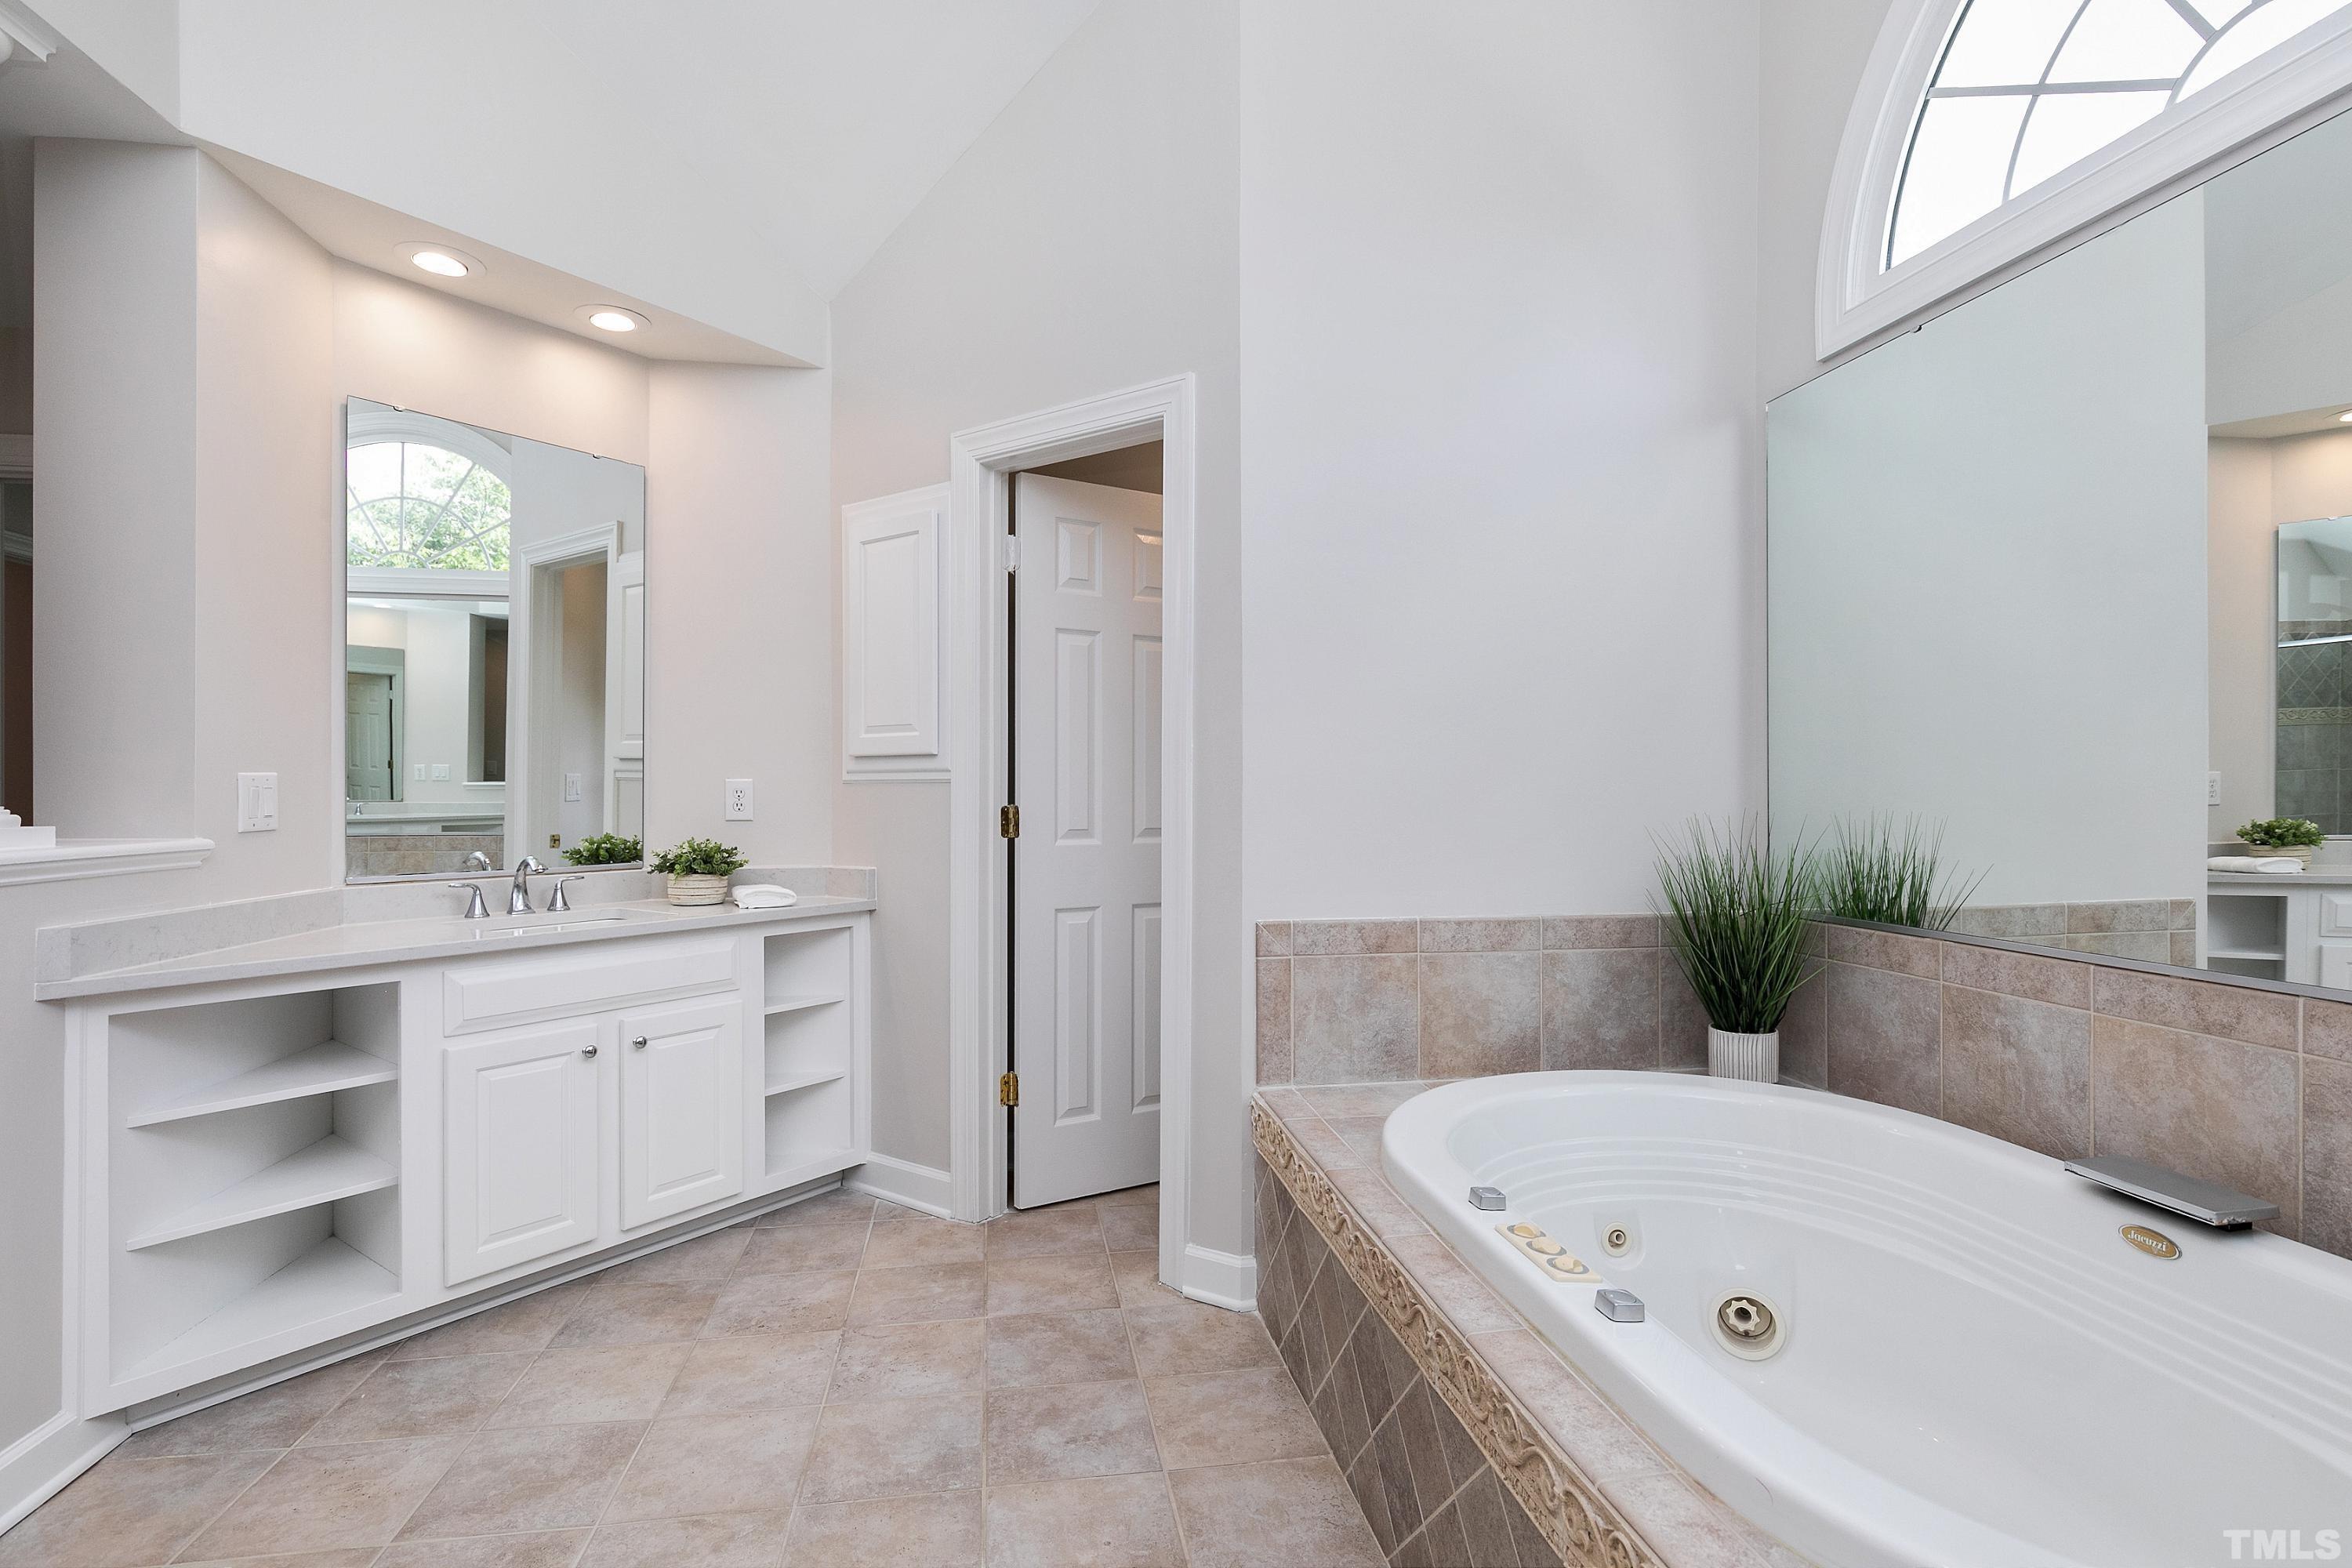 Luxury bath with whirlpool tub, walk in shower and 2 vanities with QUARTZ tops!